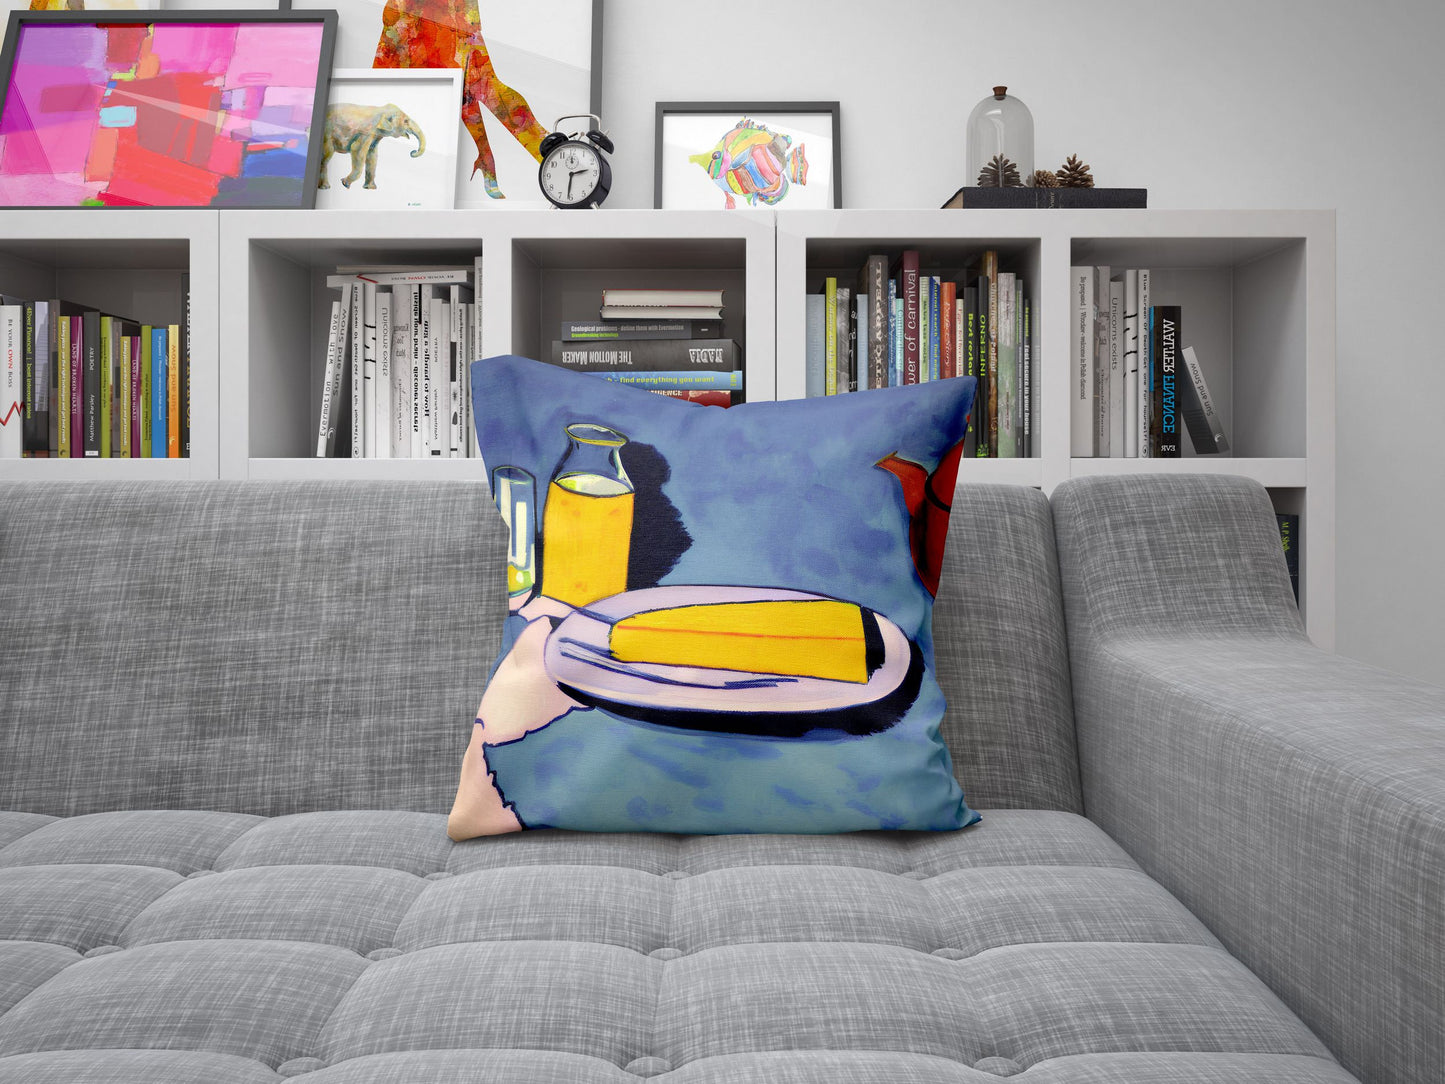 Bread And Drink, Tapestry Pillows, Abstract Pillow, Artist Pillow, Colorful Pillow Case, Modern Pillow, Square Pillow, Pillow Cases Kids